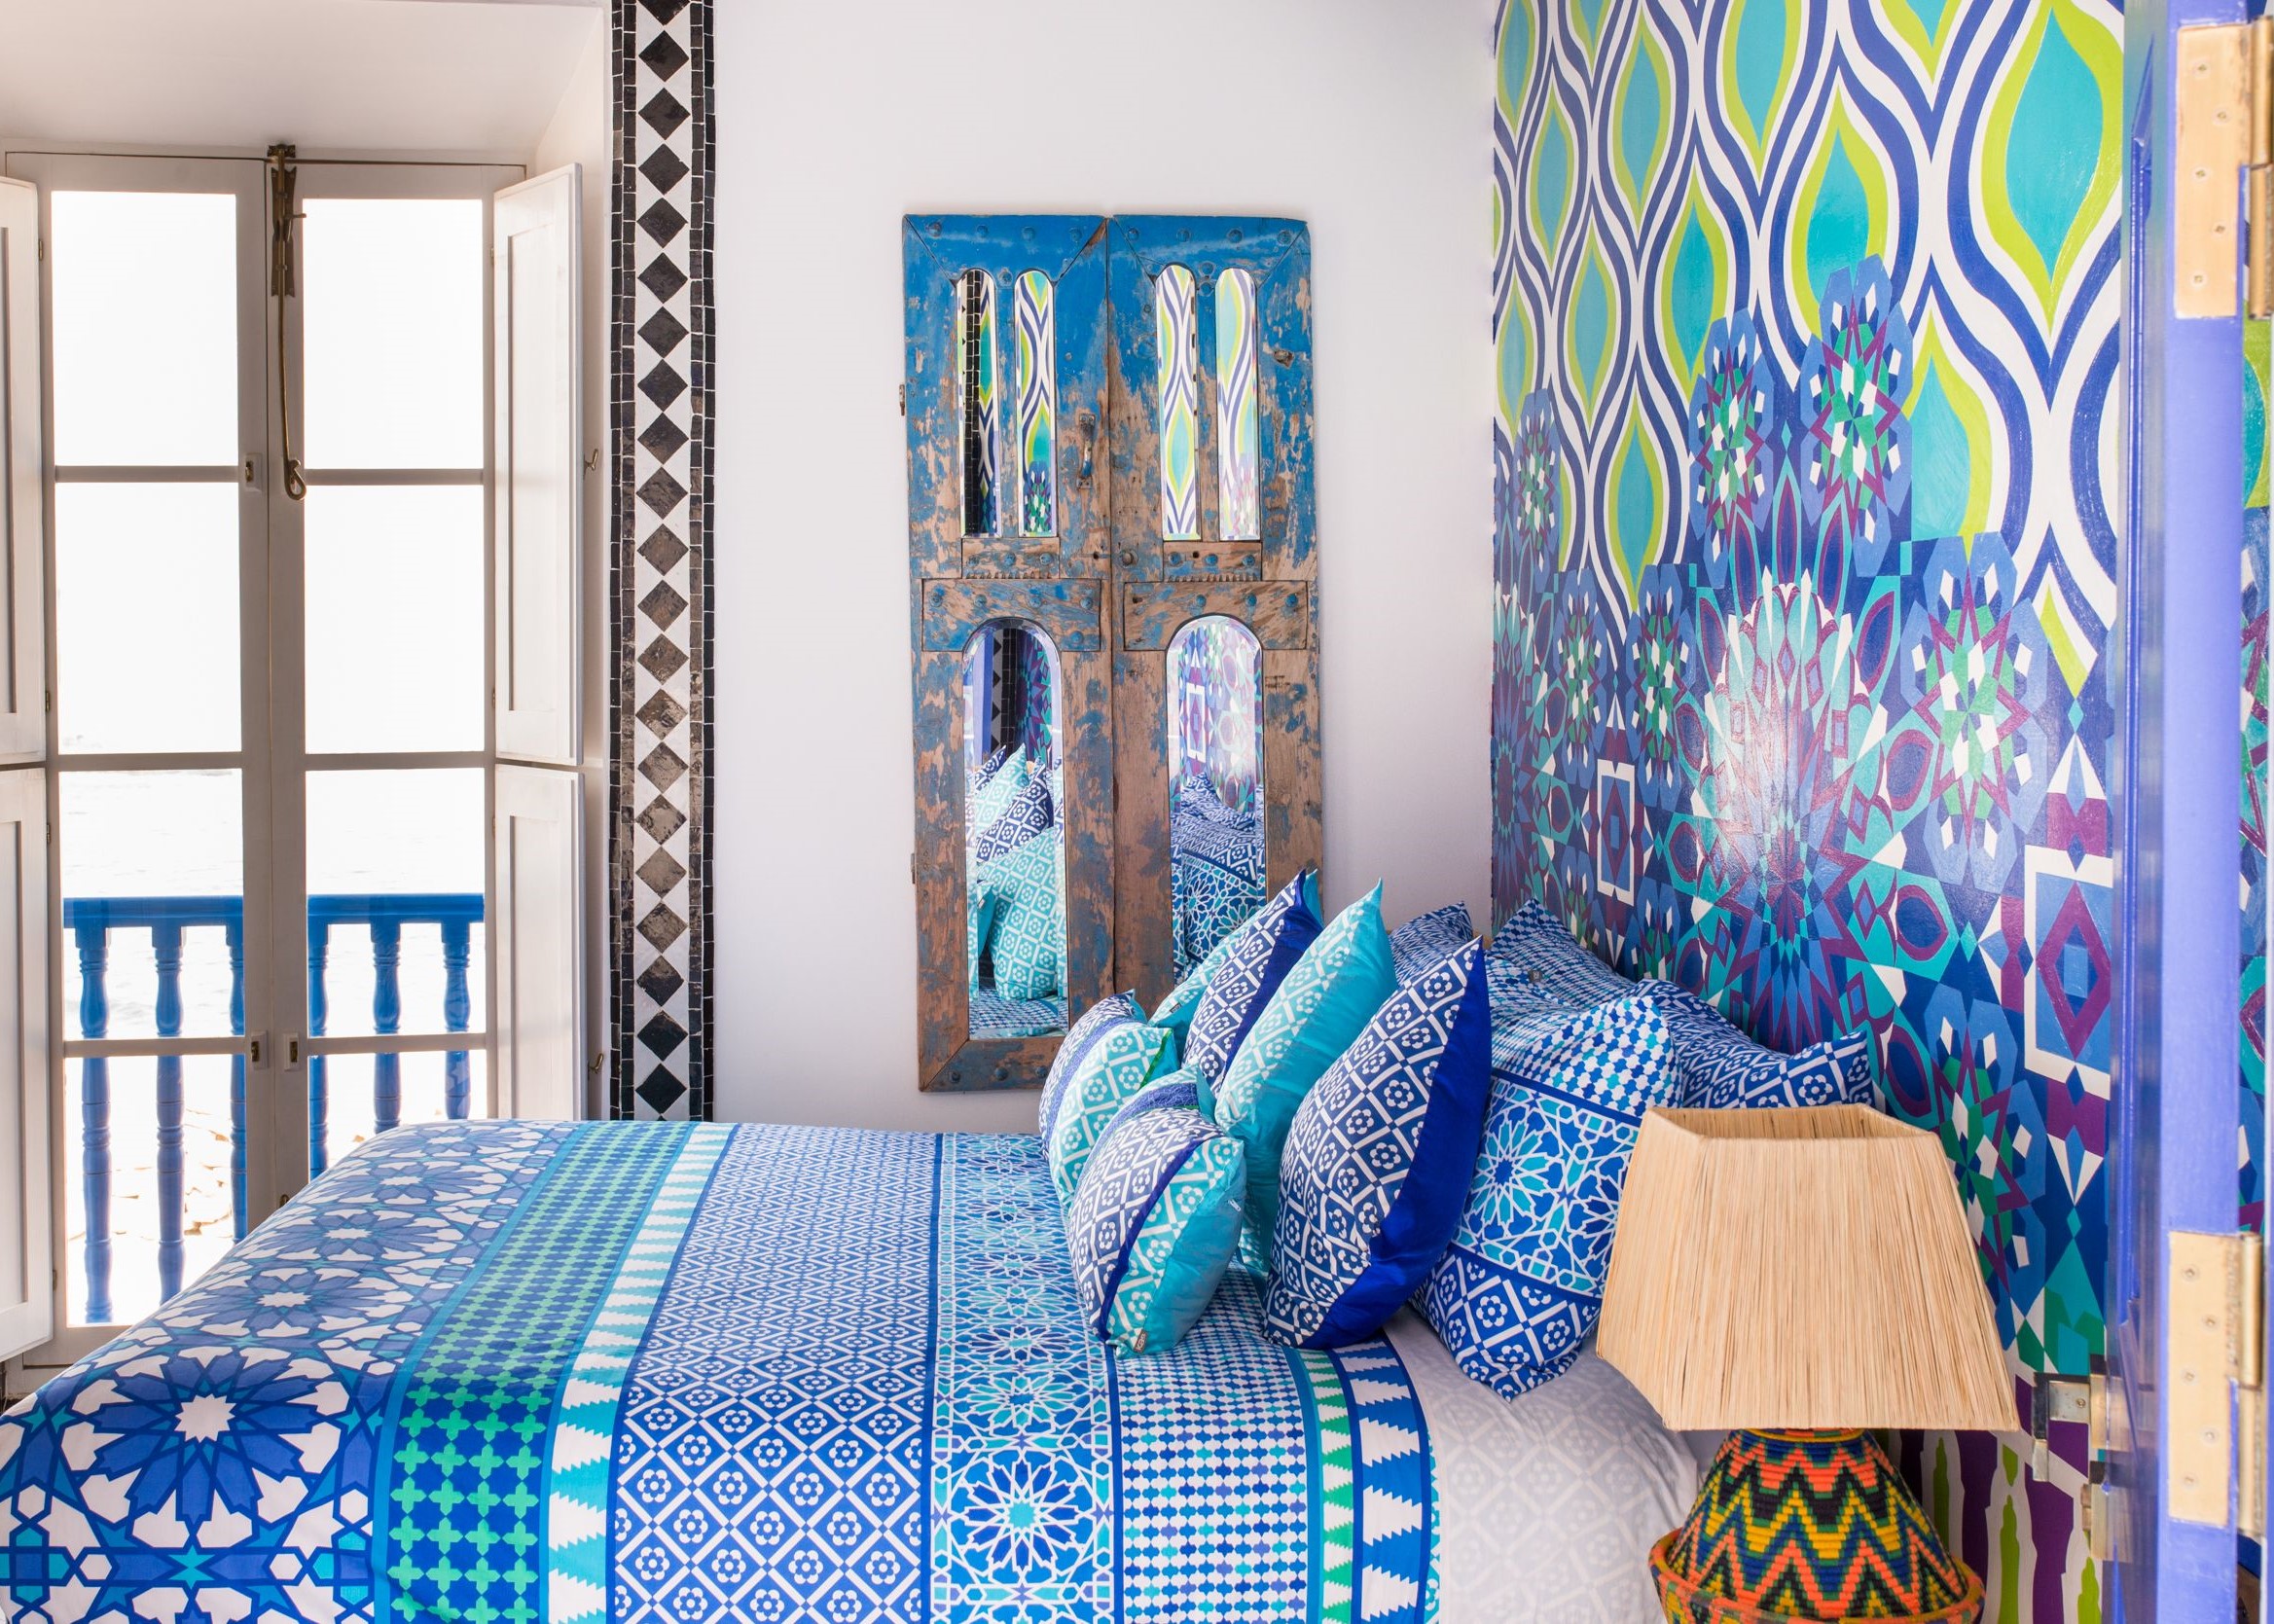 The 10 BEST hotels in Essaouira and surrounding countryside